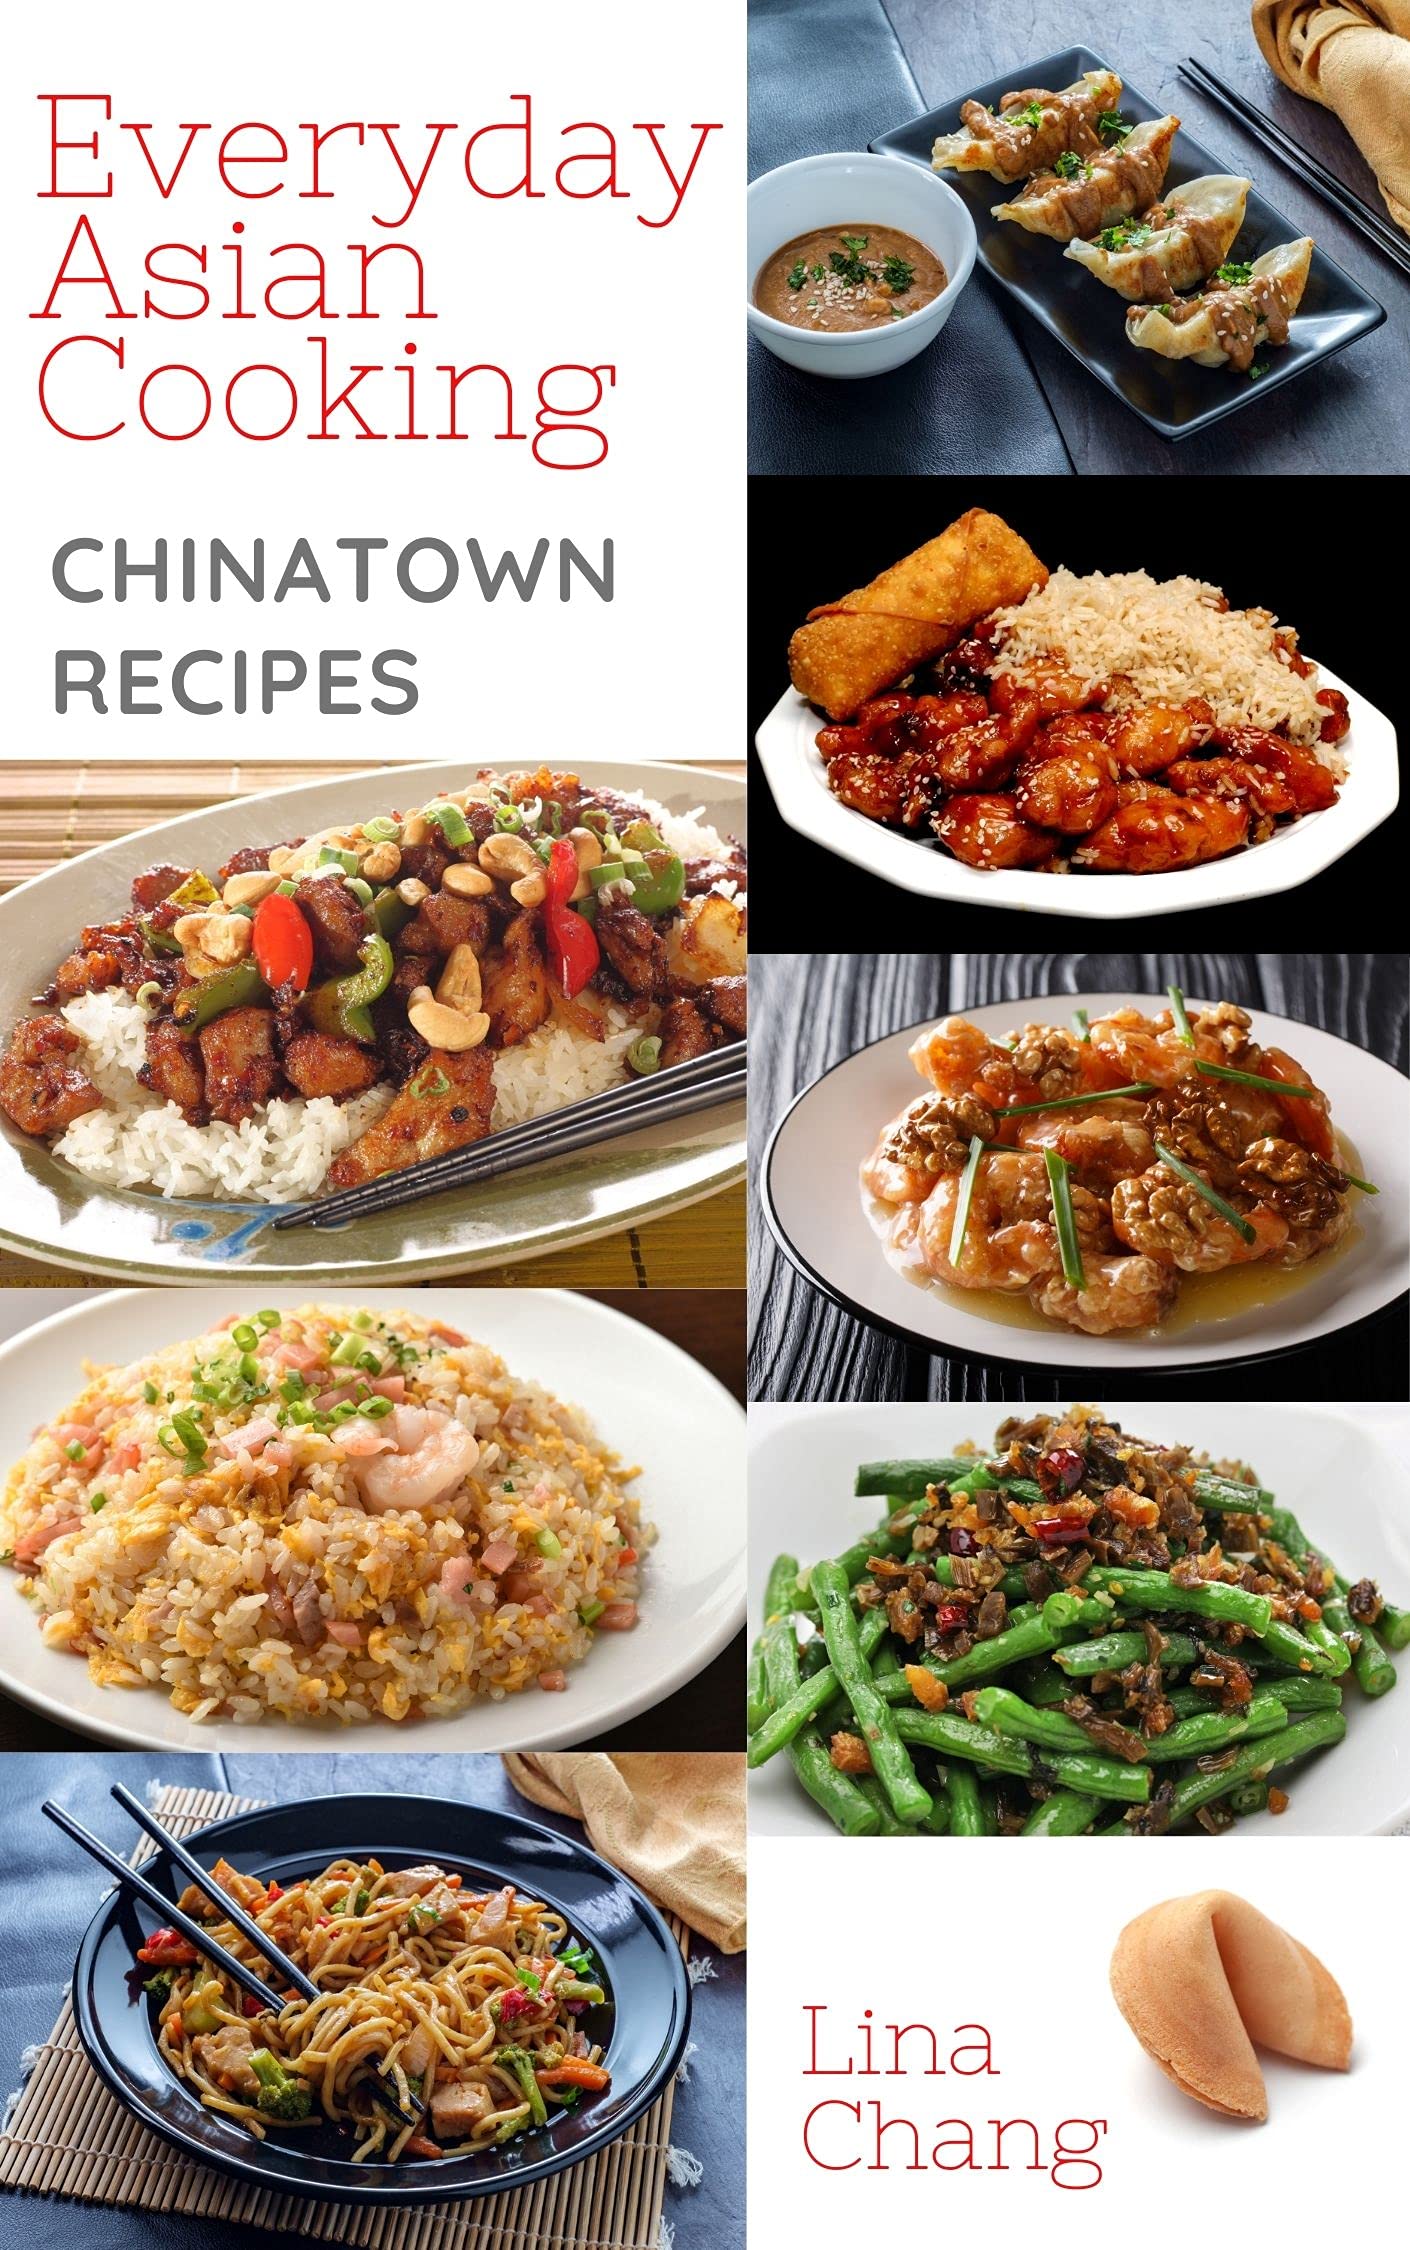 Everyday Asian Cooking - Chinatown Recipes (Quick and Easy Asian Cookbooks Book 6)